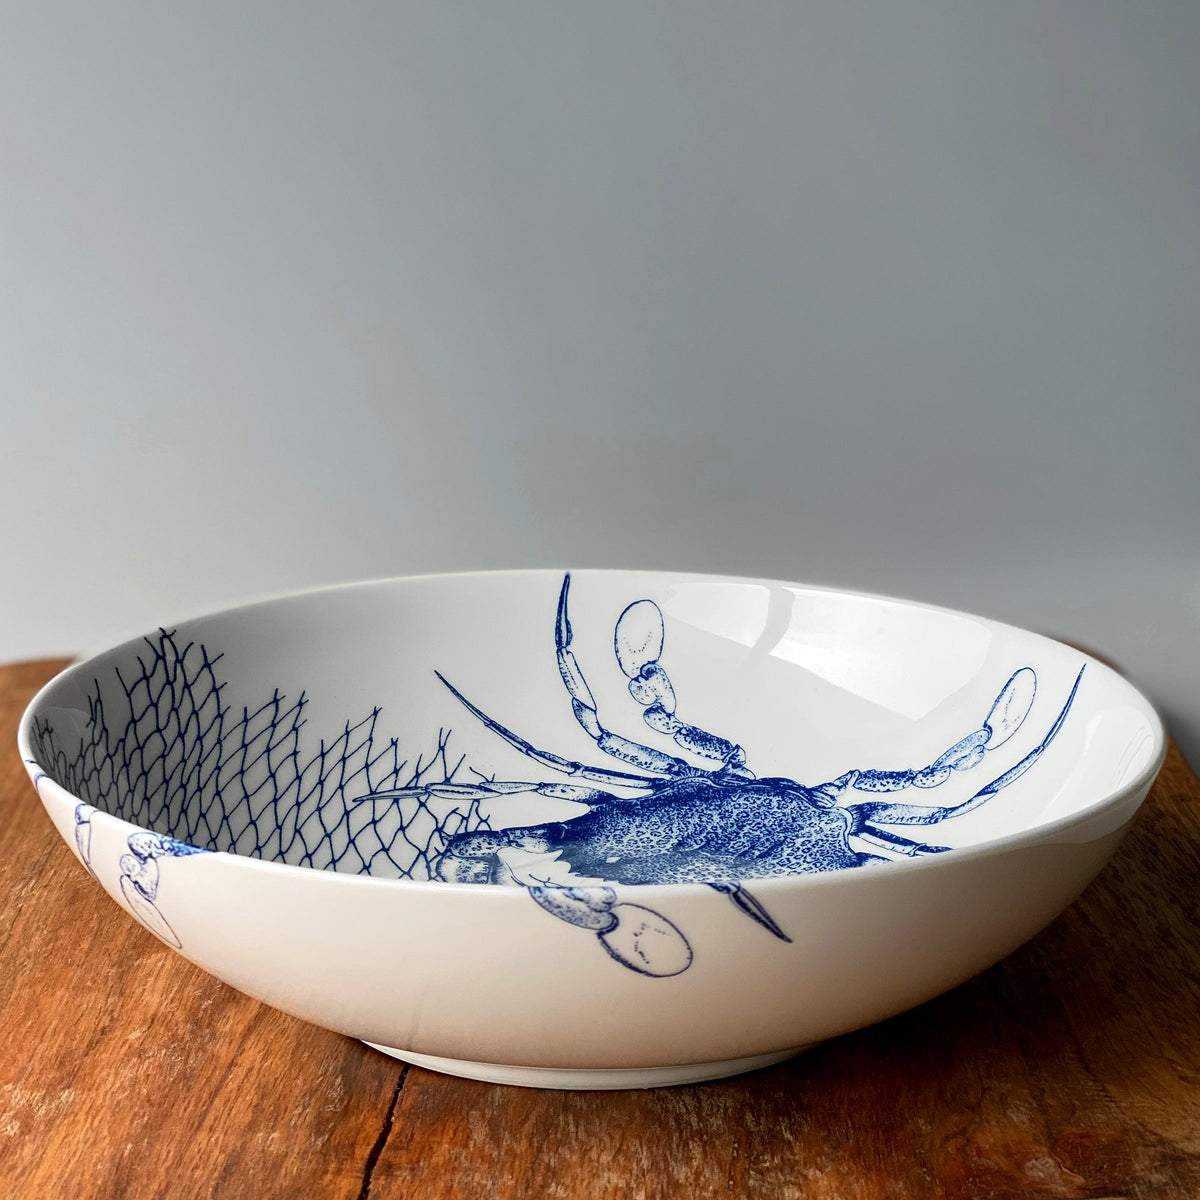 A blue and white Crab Wide Serving Bowl with a crab design, dishwasher and microwave safe, made by Caskata Artisanal Home.